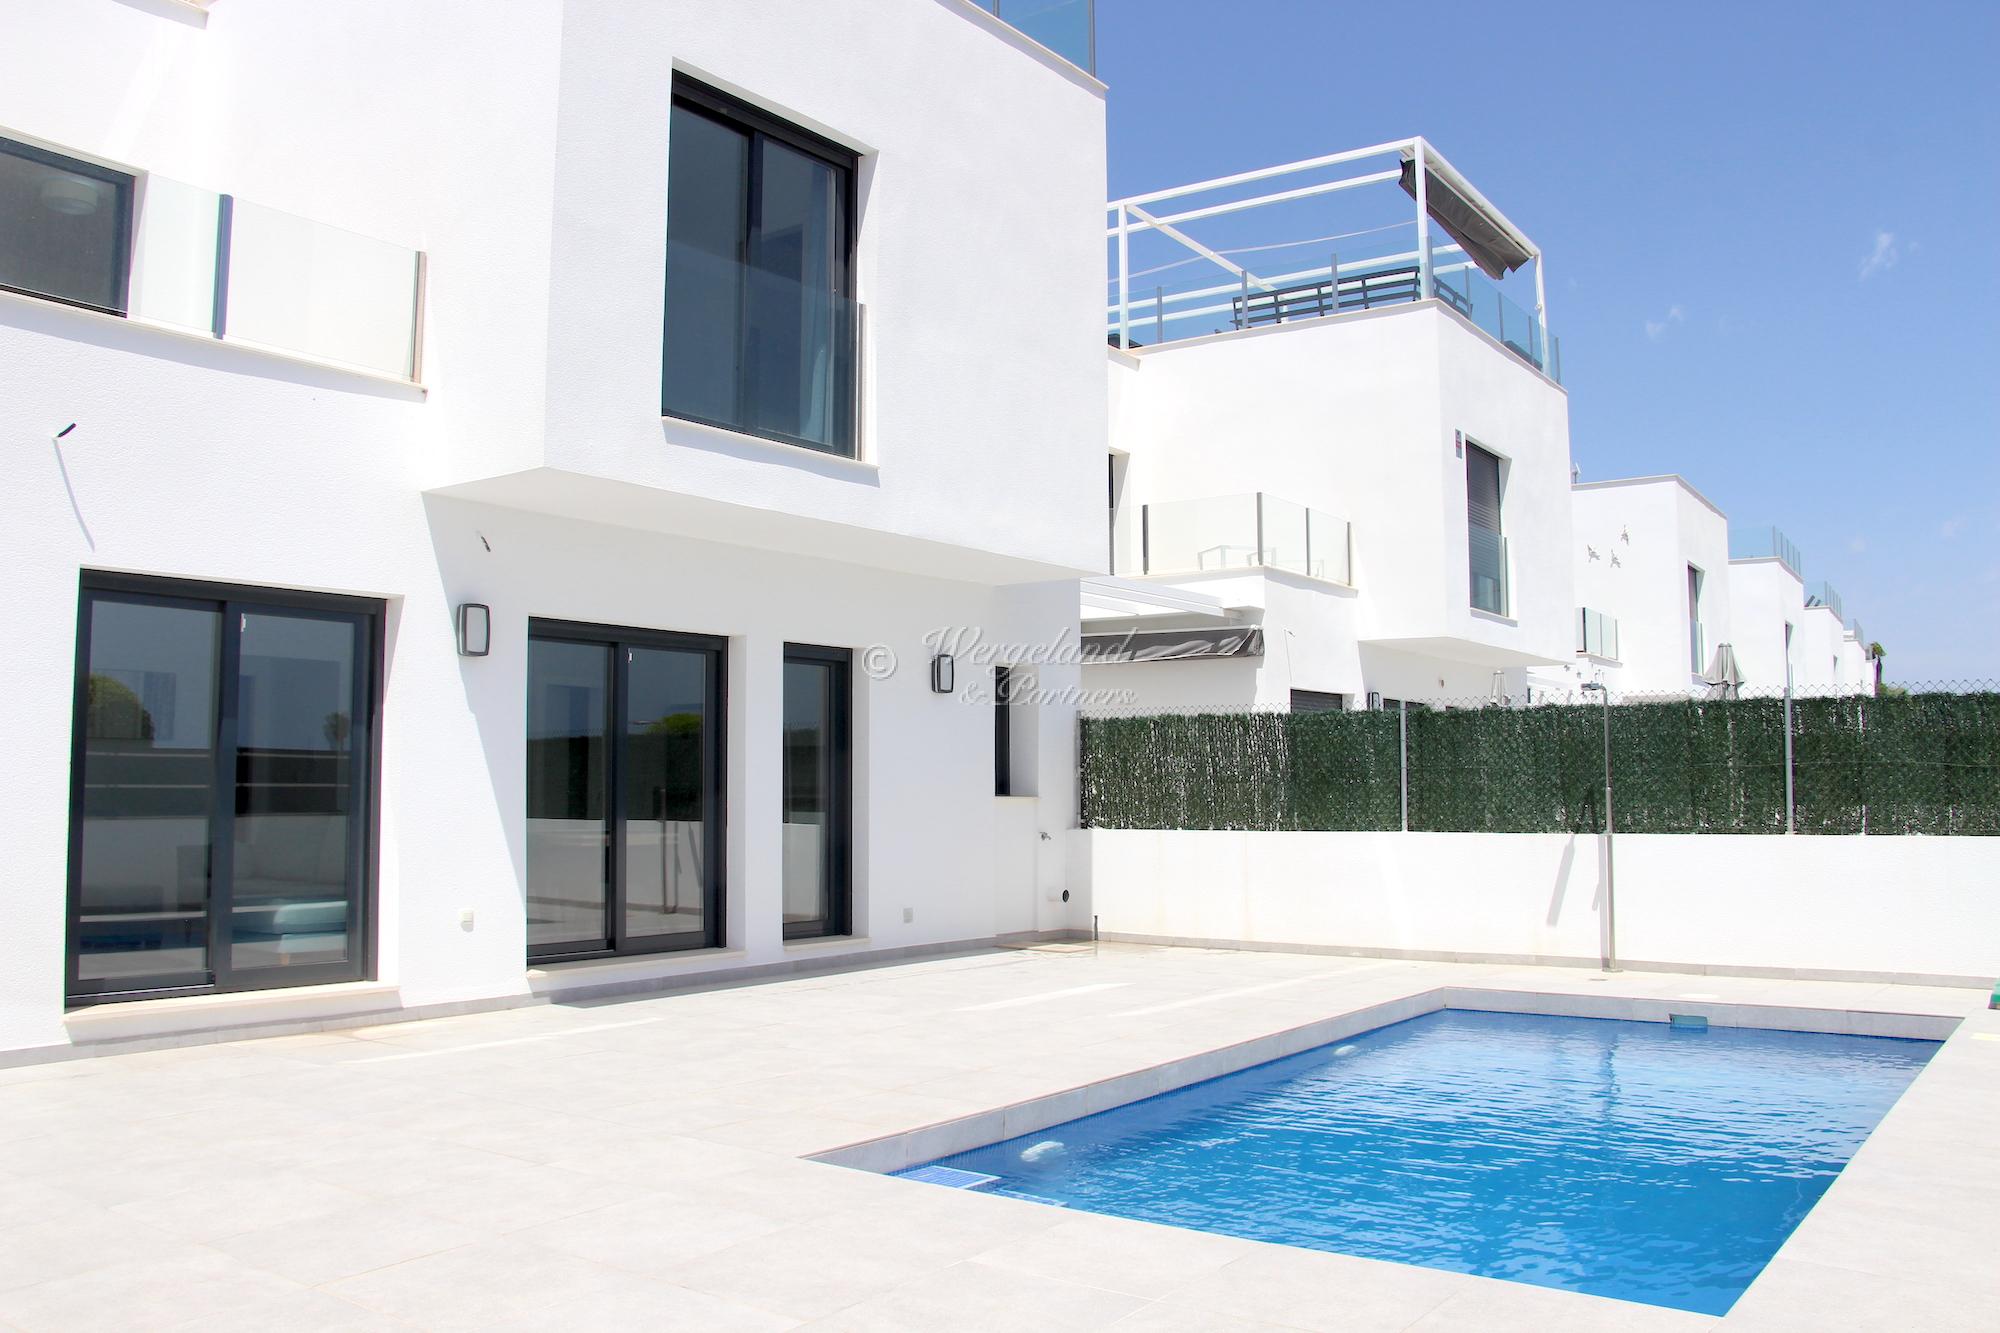 3 bed unfurnished villa with private pool and roof terrace in popular area [EV7]